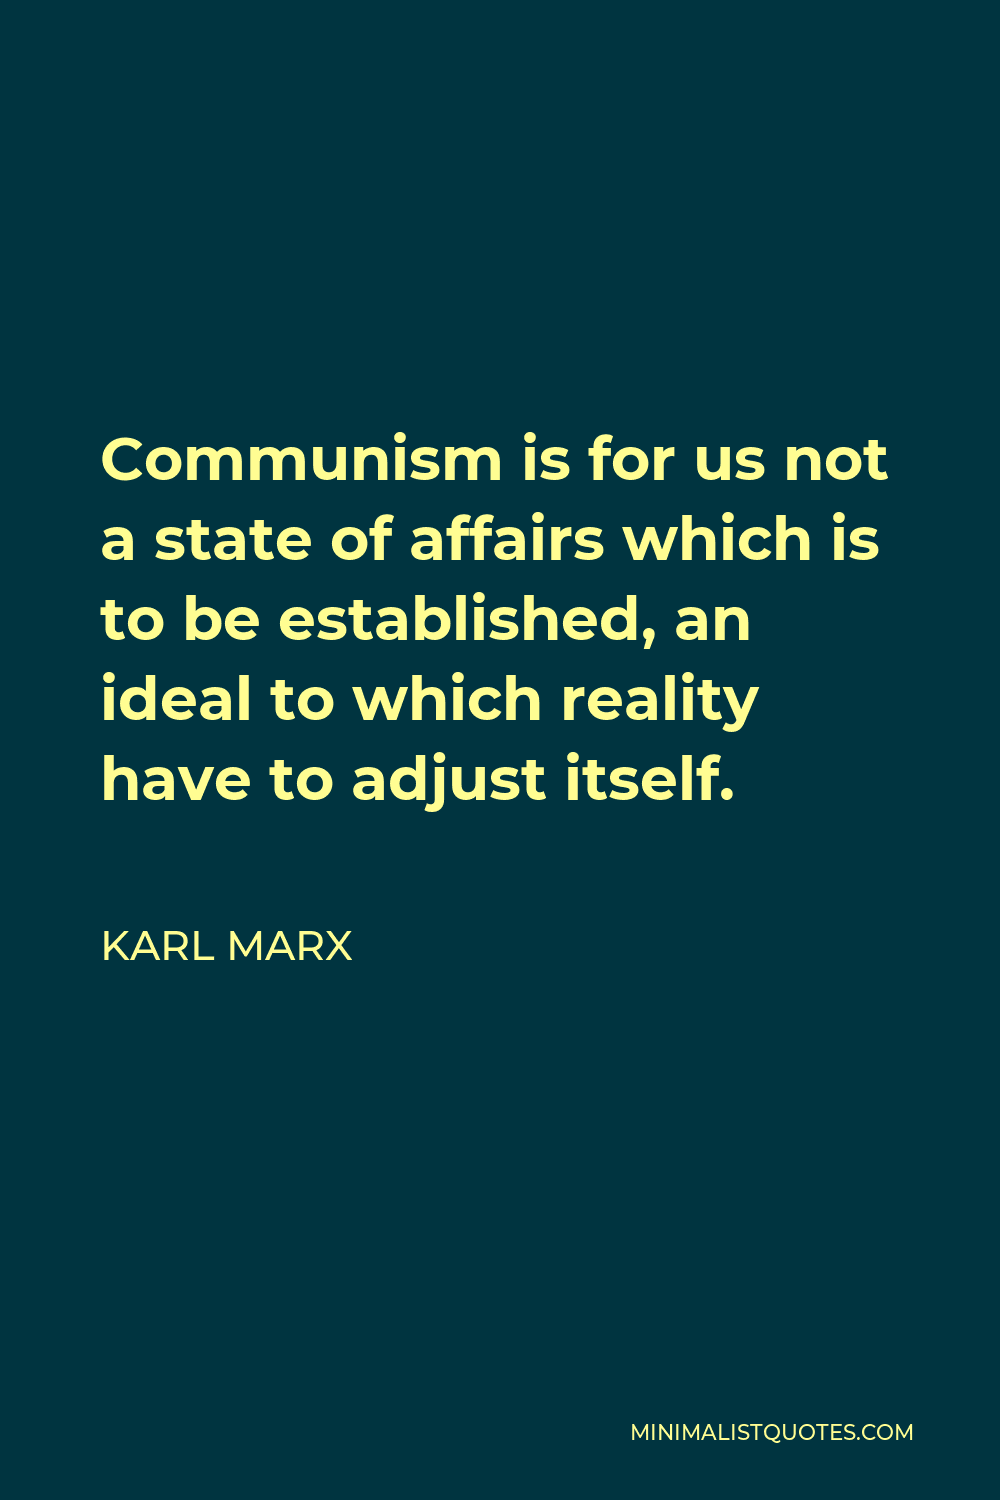 Karl Marx Quote - Communism is for us not a state of affairs which is to be established, an ideal to which reality have to adjust itself.